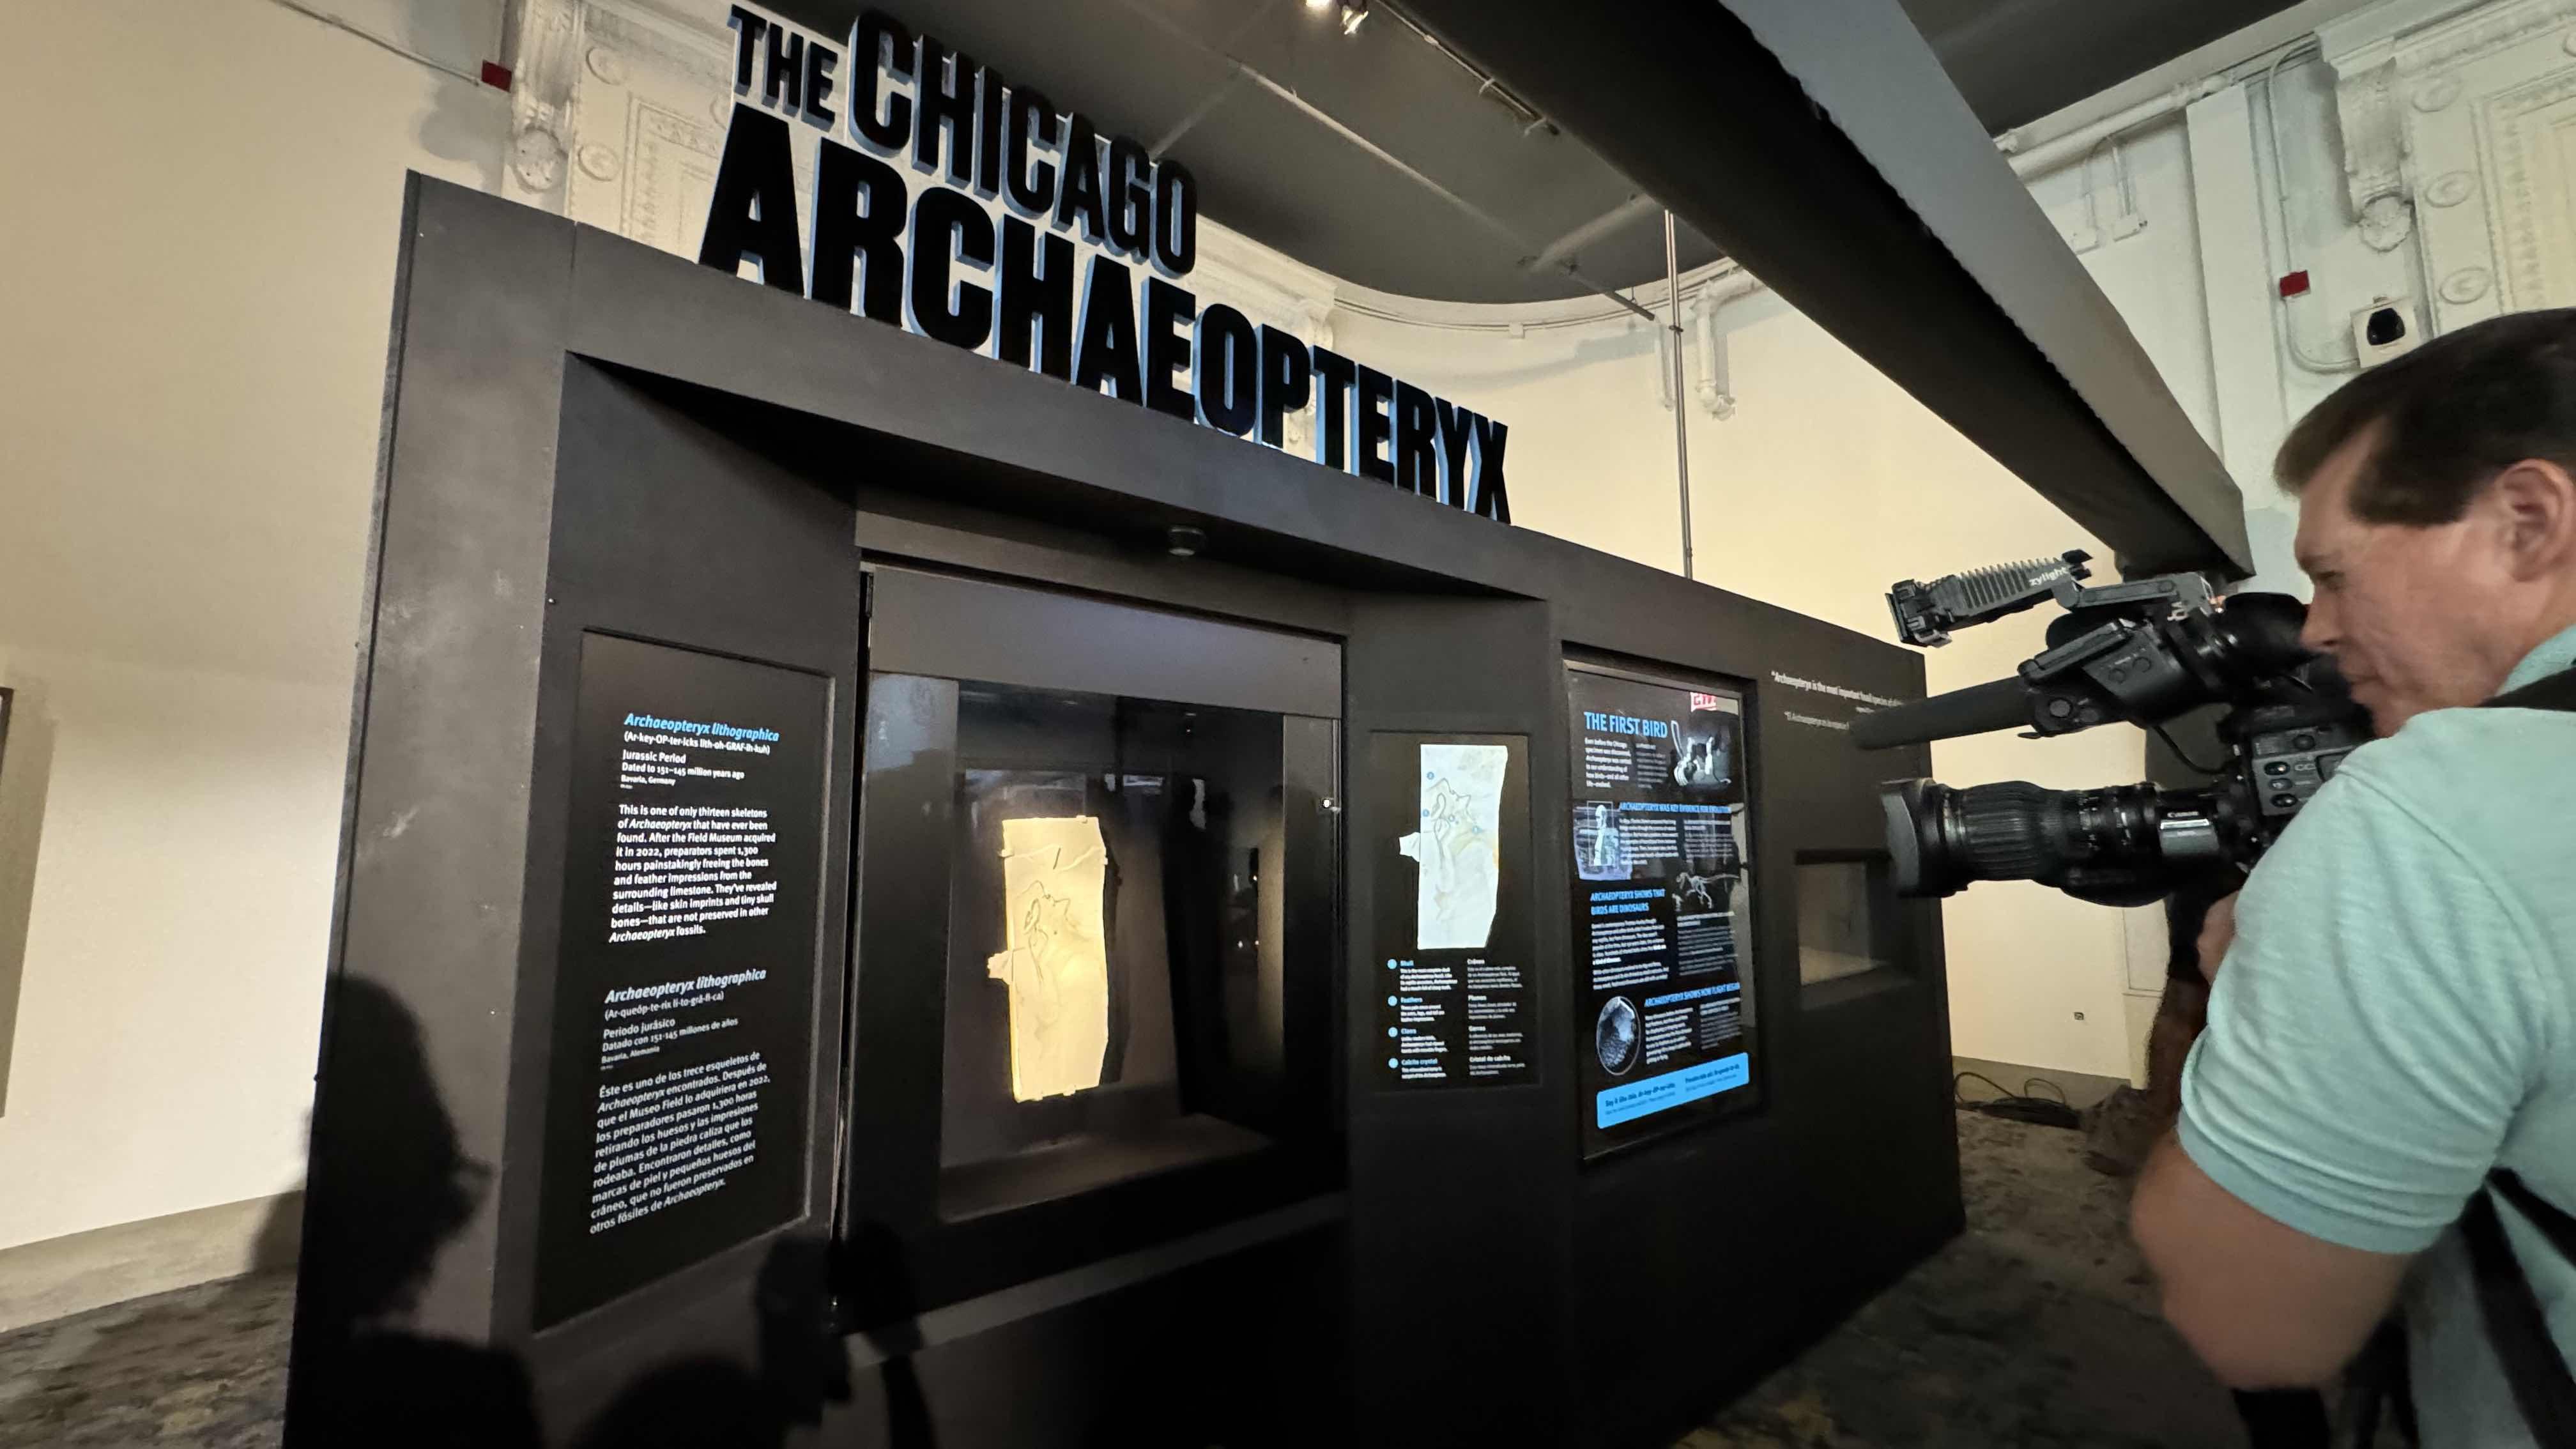 The Chicago Archaeopteryx, unveiled in May, has been on display in a temporary exhibit. It will go off view for the summer while its permanent exhibit is under construction. (Patty Wetli / WTTW News)